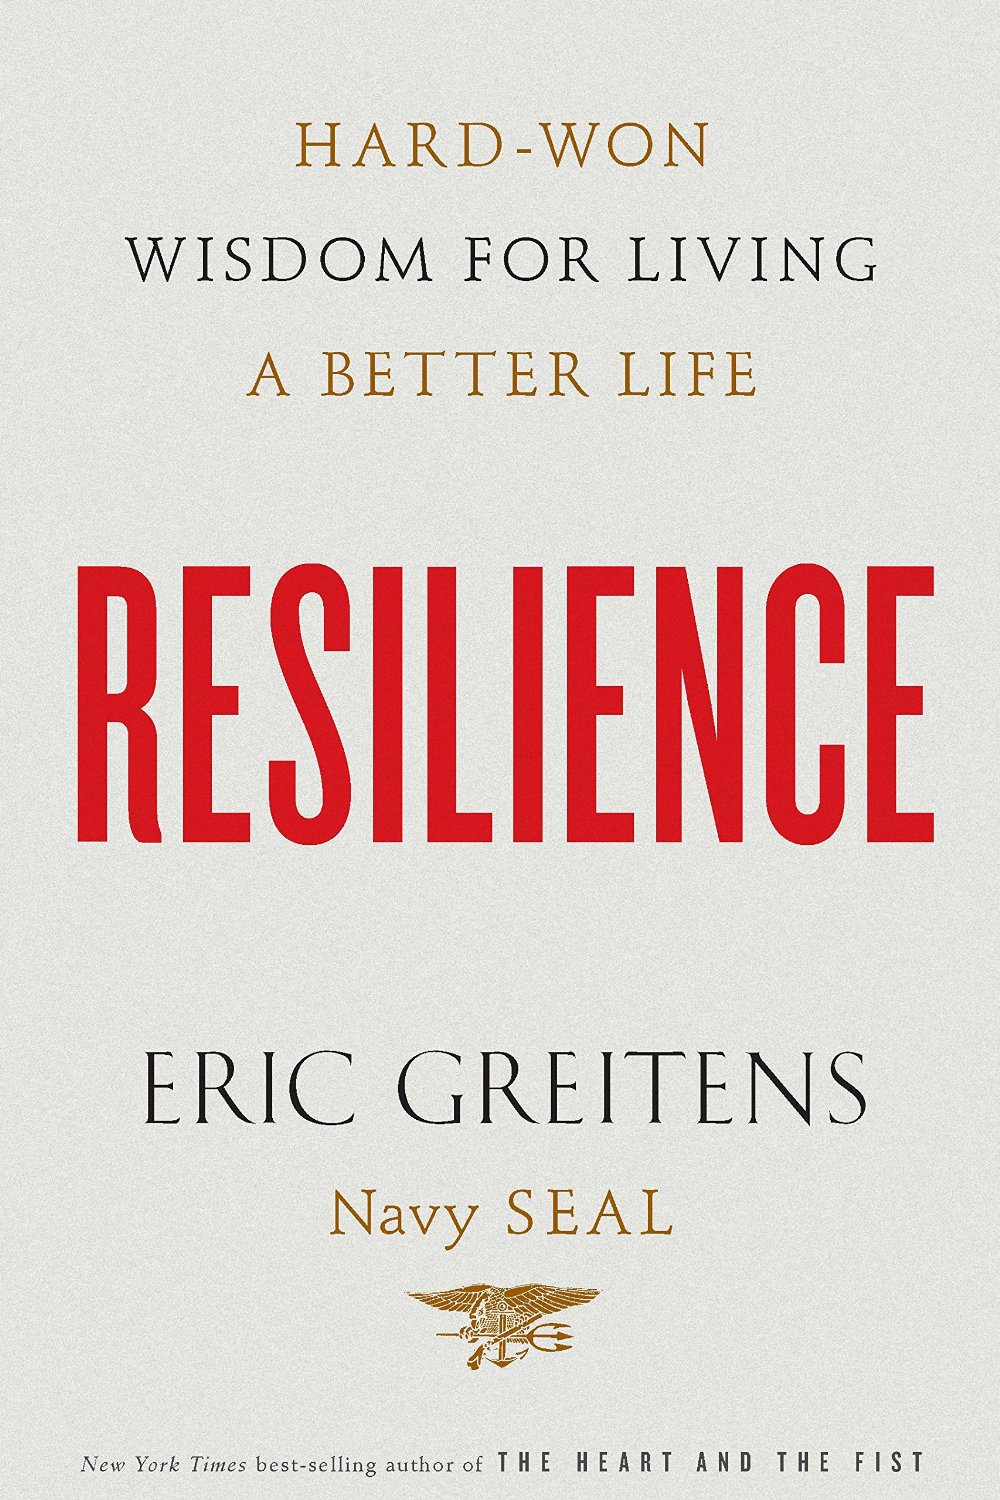 Tune in to Eric Greitens' podcast for hard-won wisdom on resilience and living a better life.